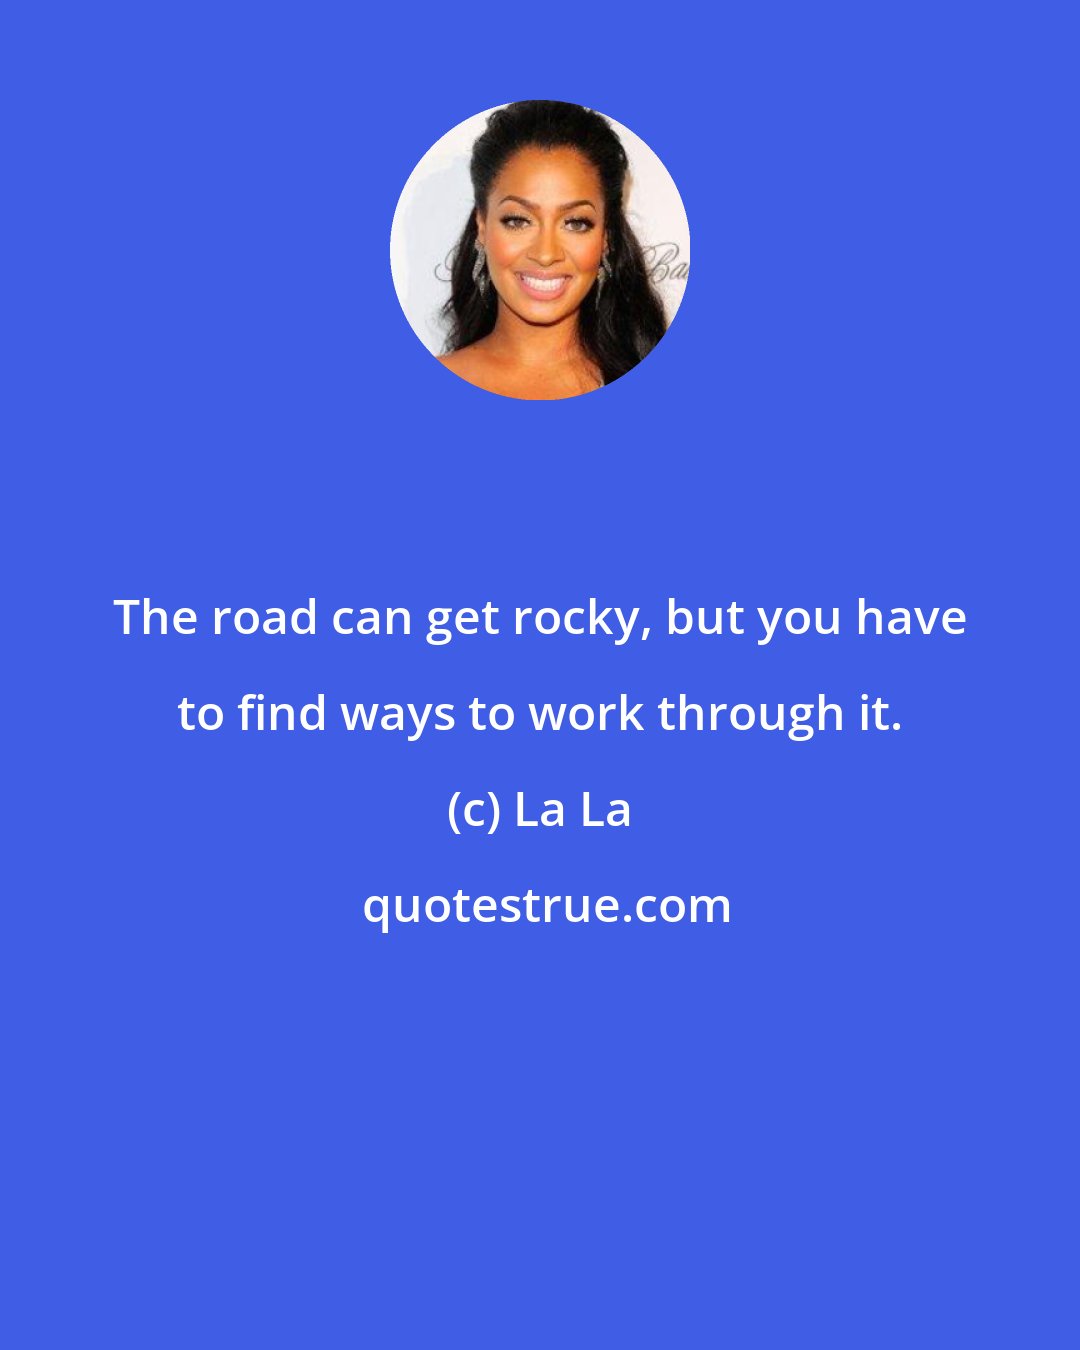 La La: The road can get rocky, but you have to find ways to work through it.